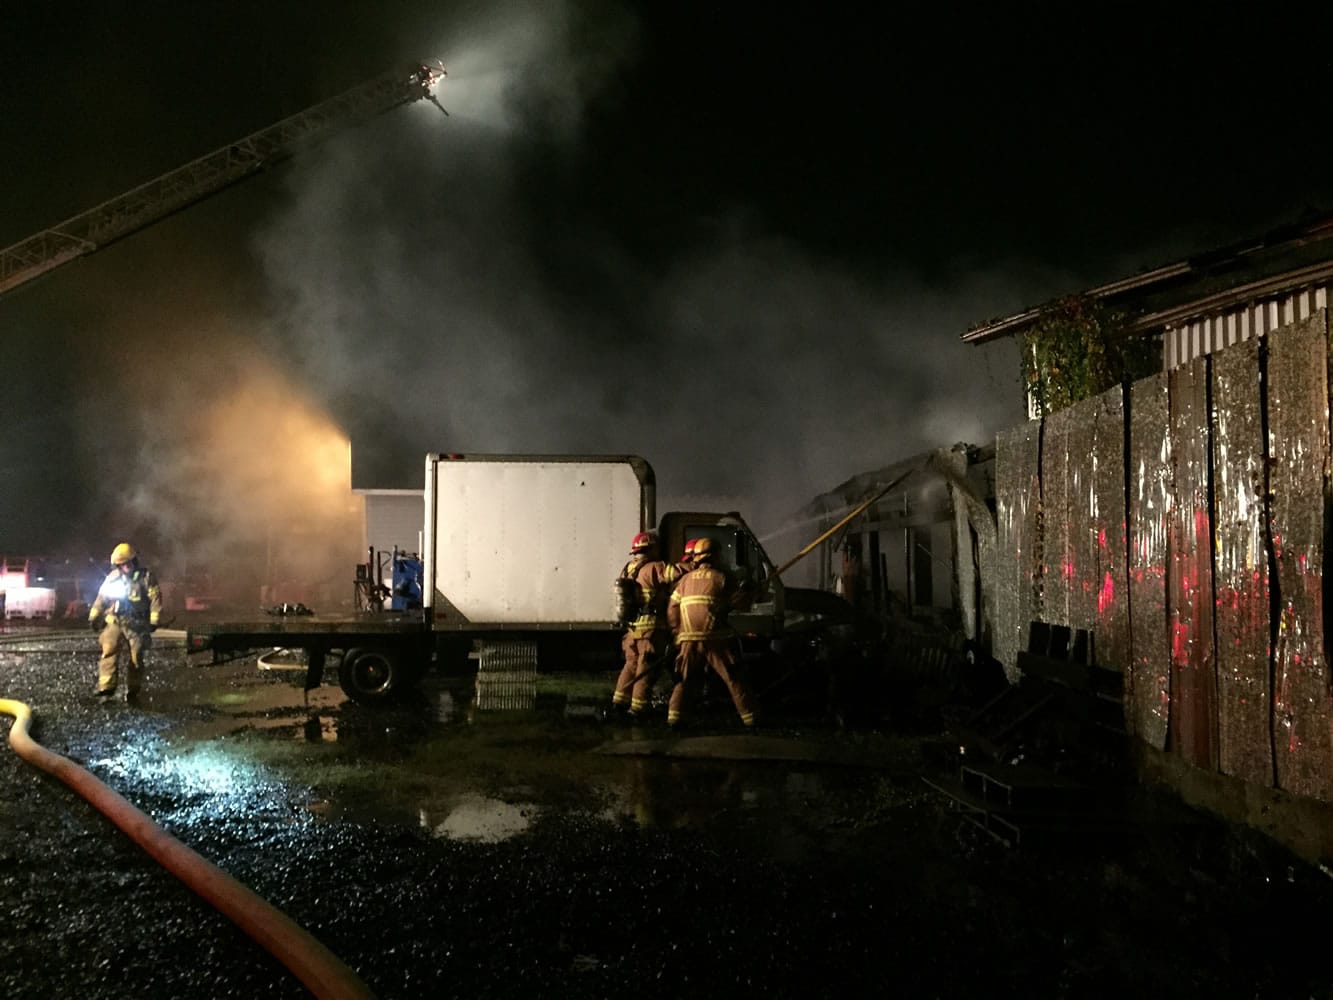 Firefighters attacked a blaze at a Woodland auto repair shop early this morning.